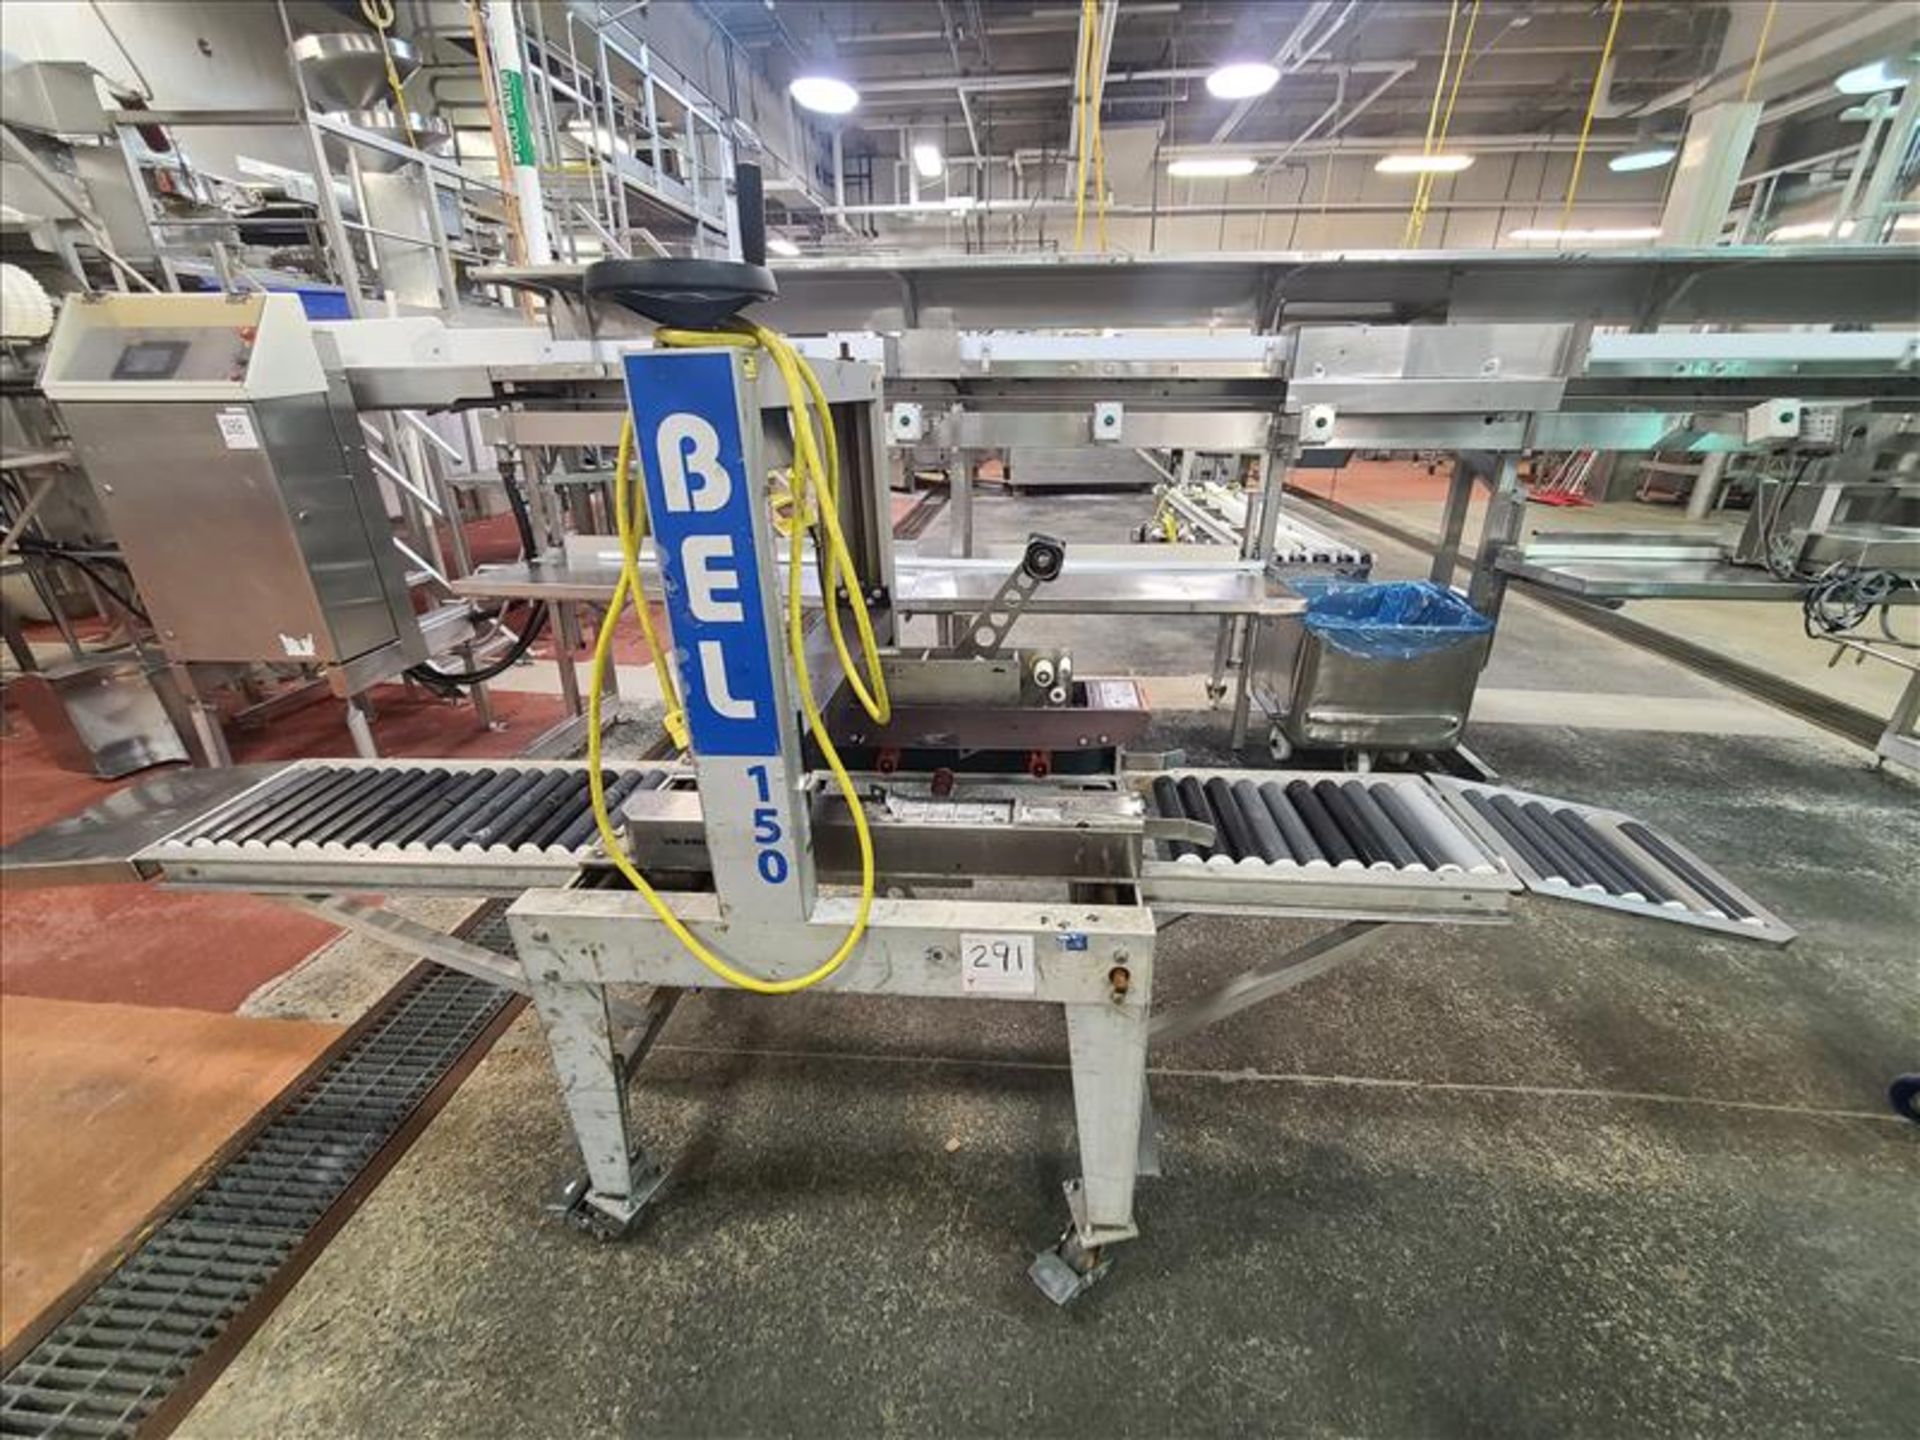 Bel 150 top and bottom case sealer, stainless steel w/ Uni-Drive and casters [Loc. Packaging/